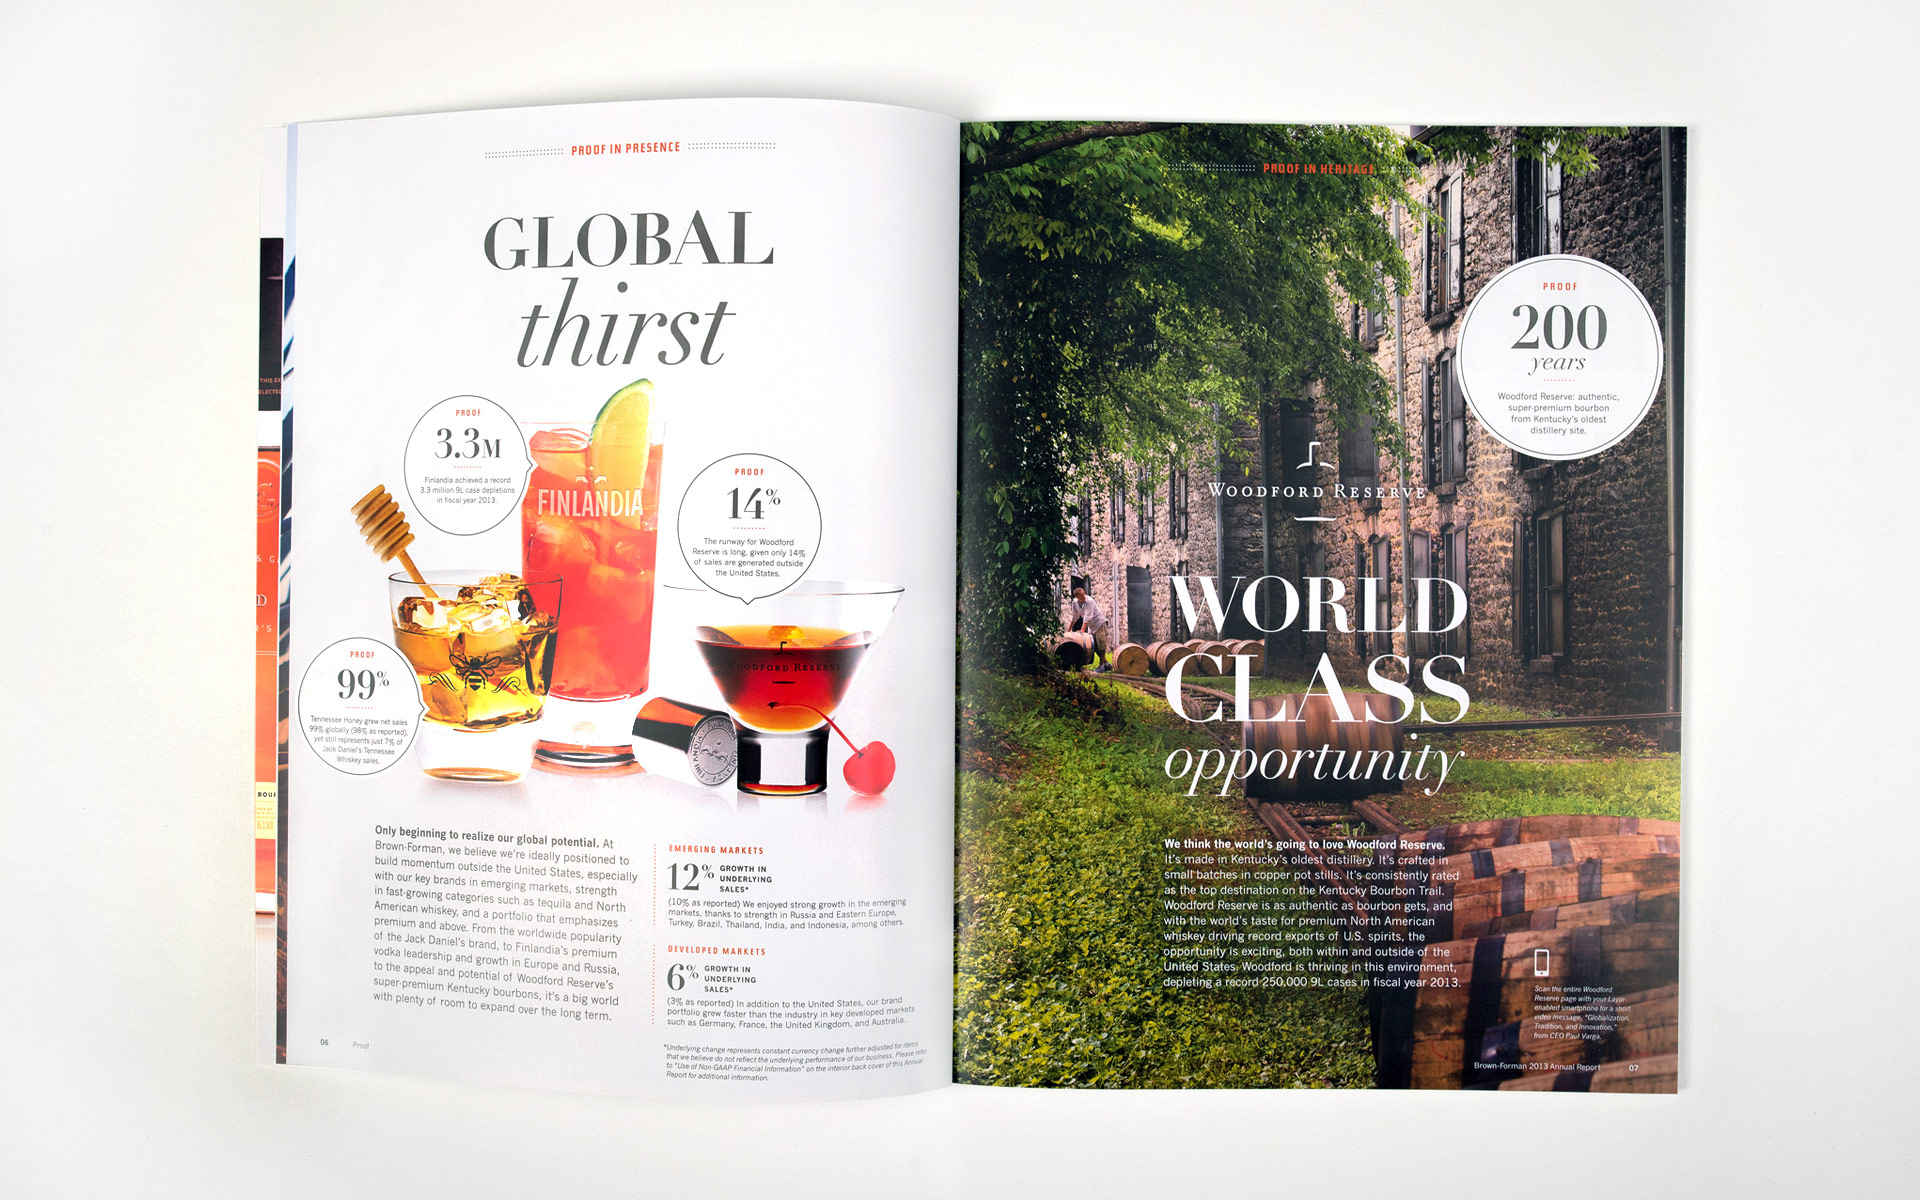 Brown Forman 2013 Annual Report